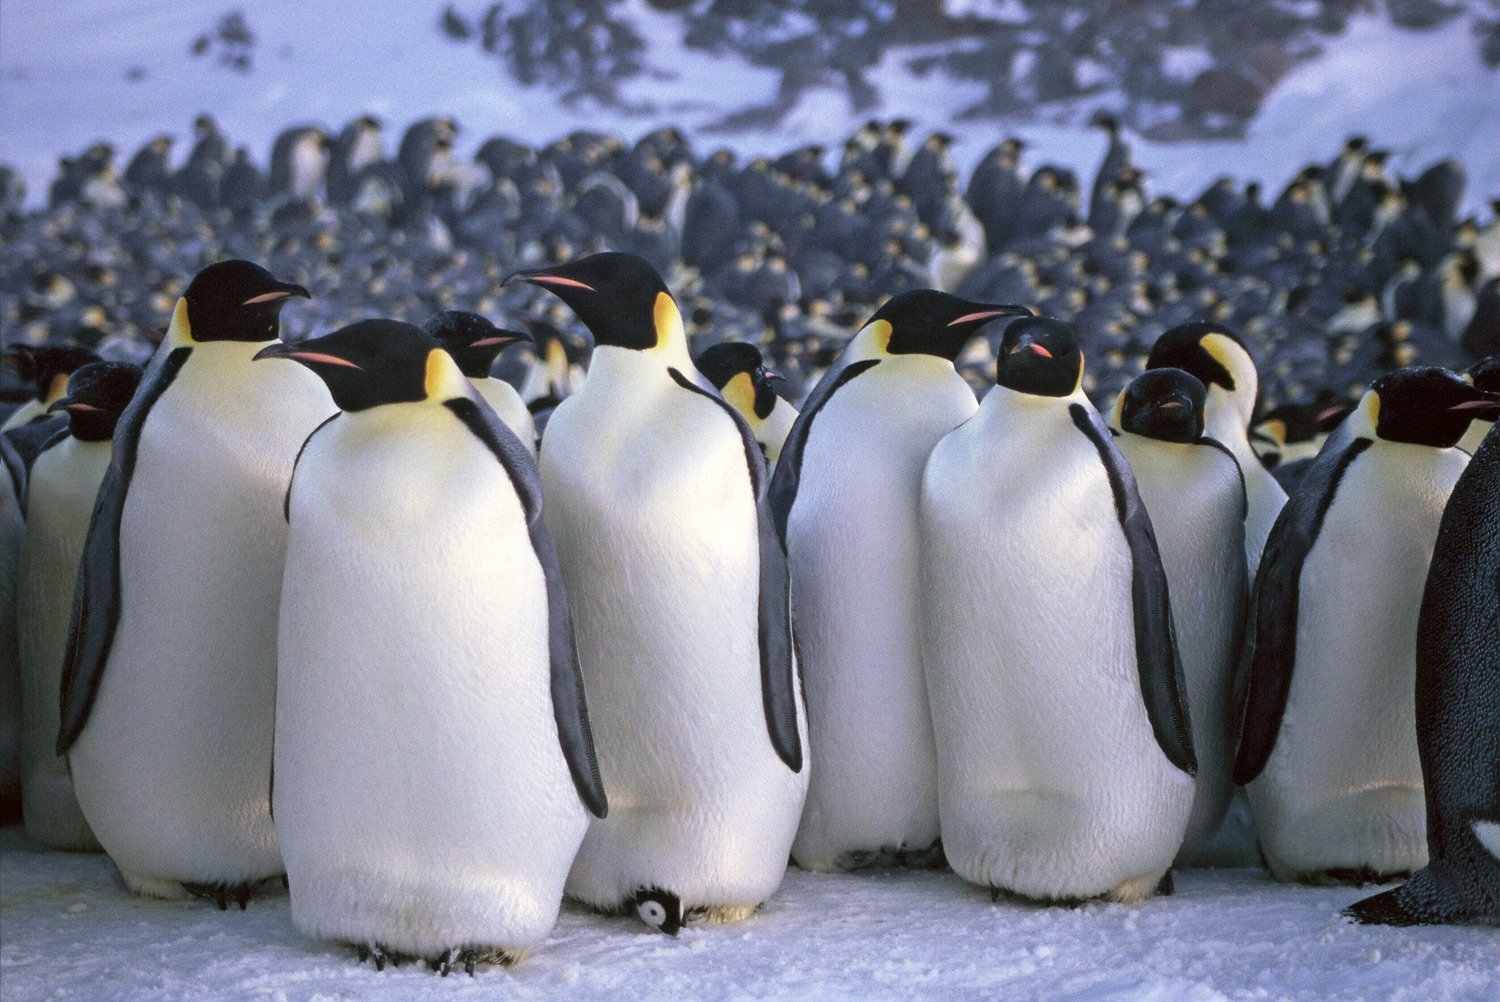 World's Second Largest Penguin Community In Antarctica Is Disappearing